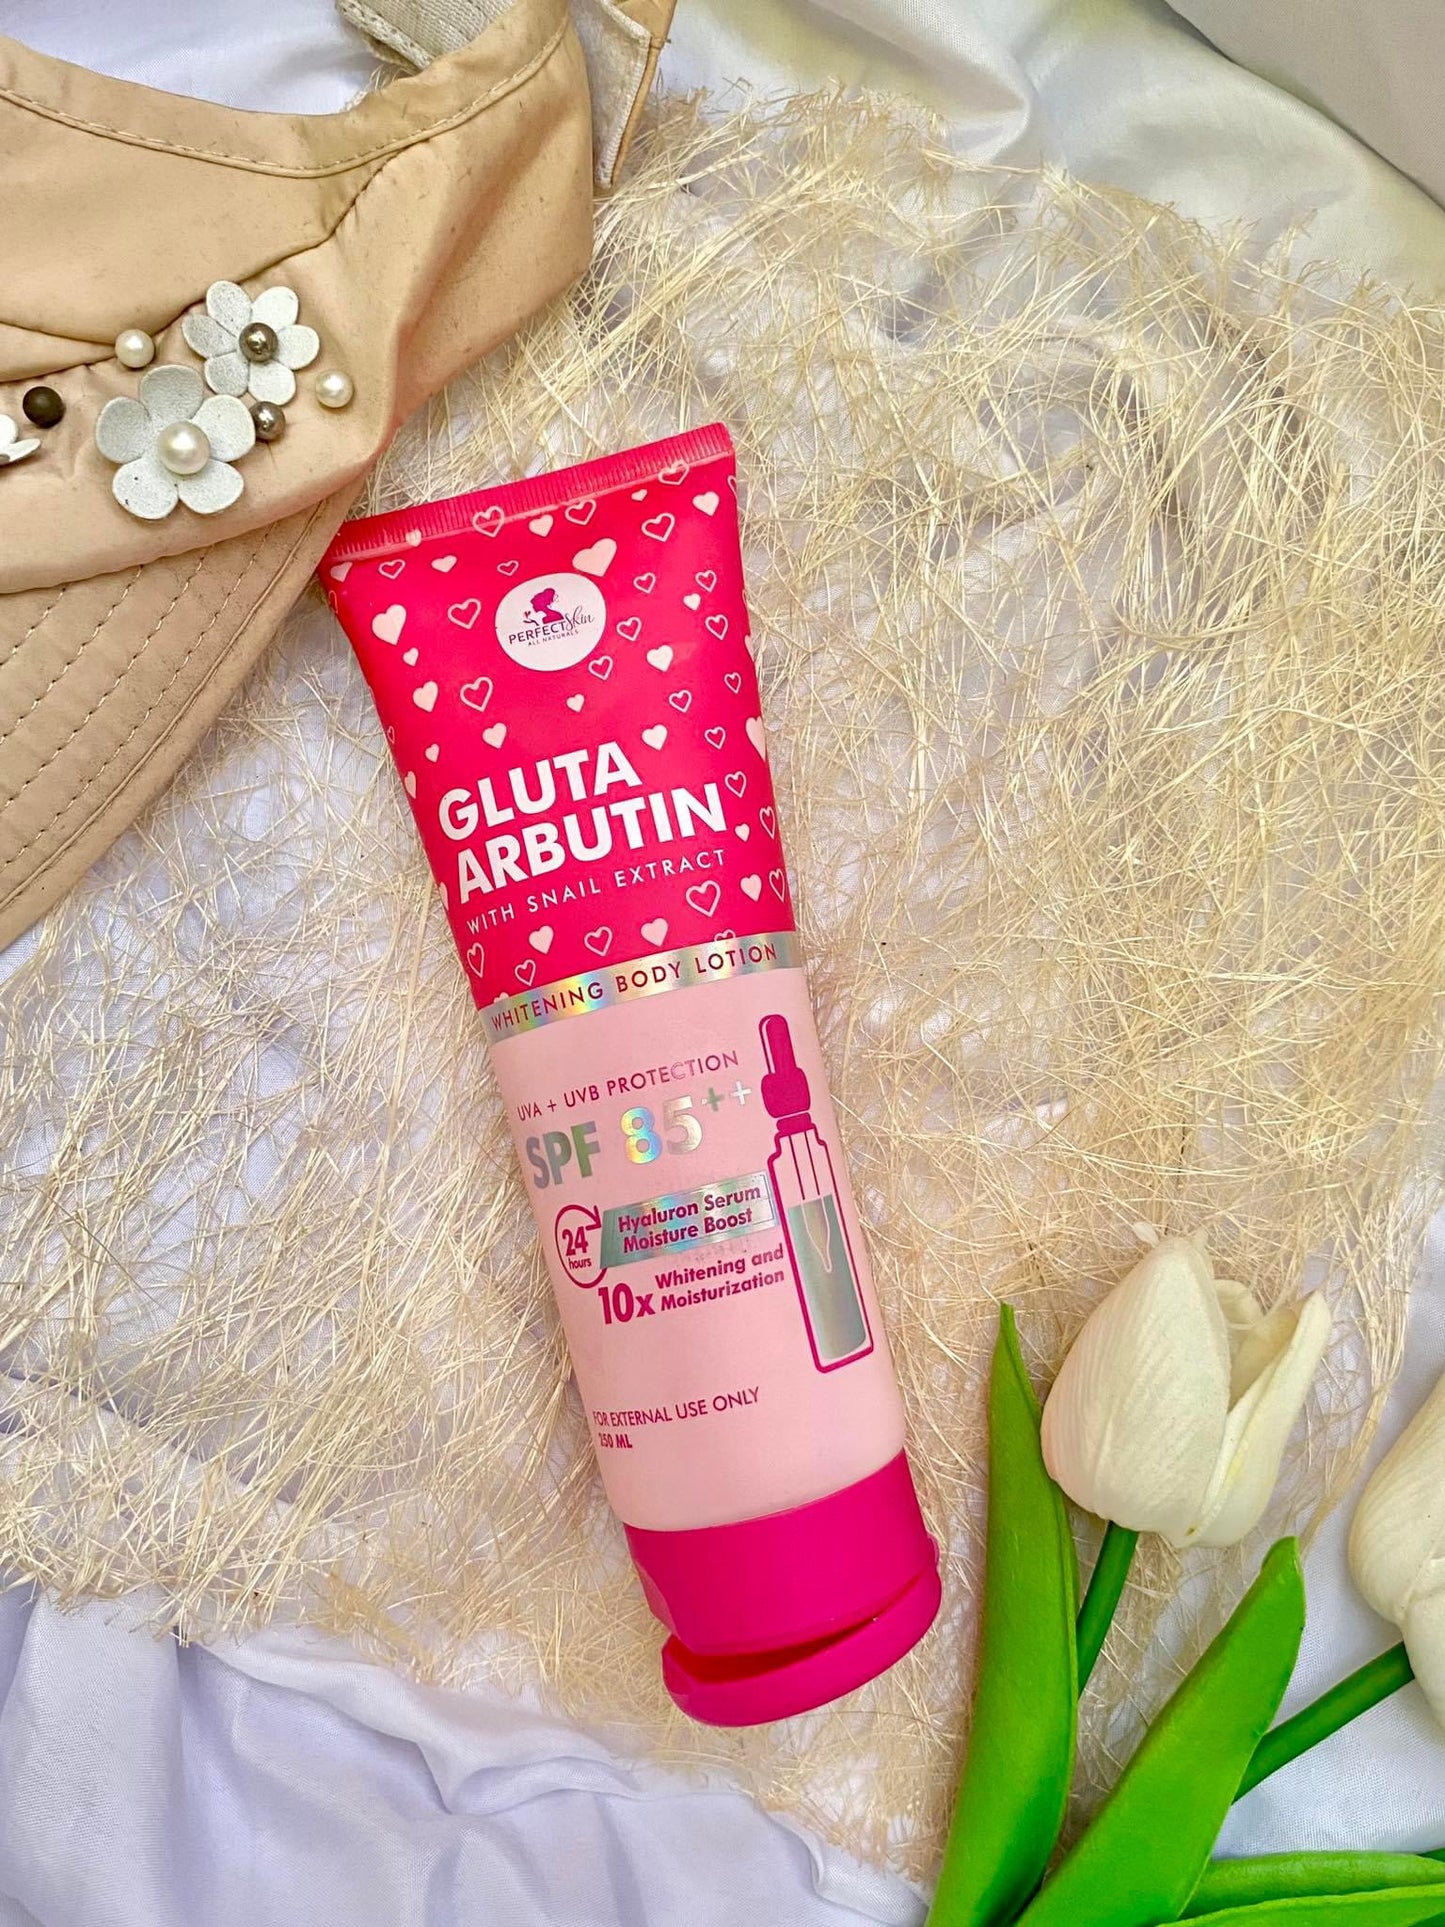 Gluta Arbutin With Snail Extract Whitening Body Lotion SPF 85++